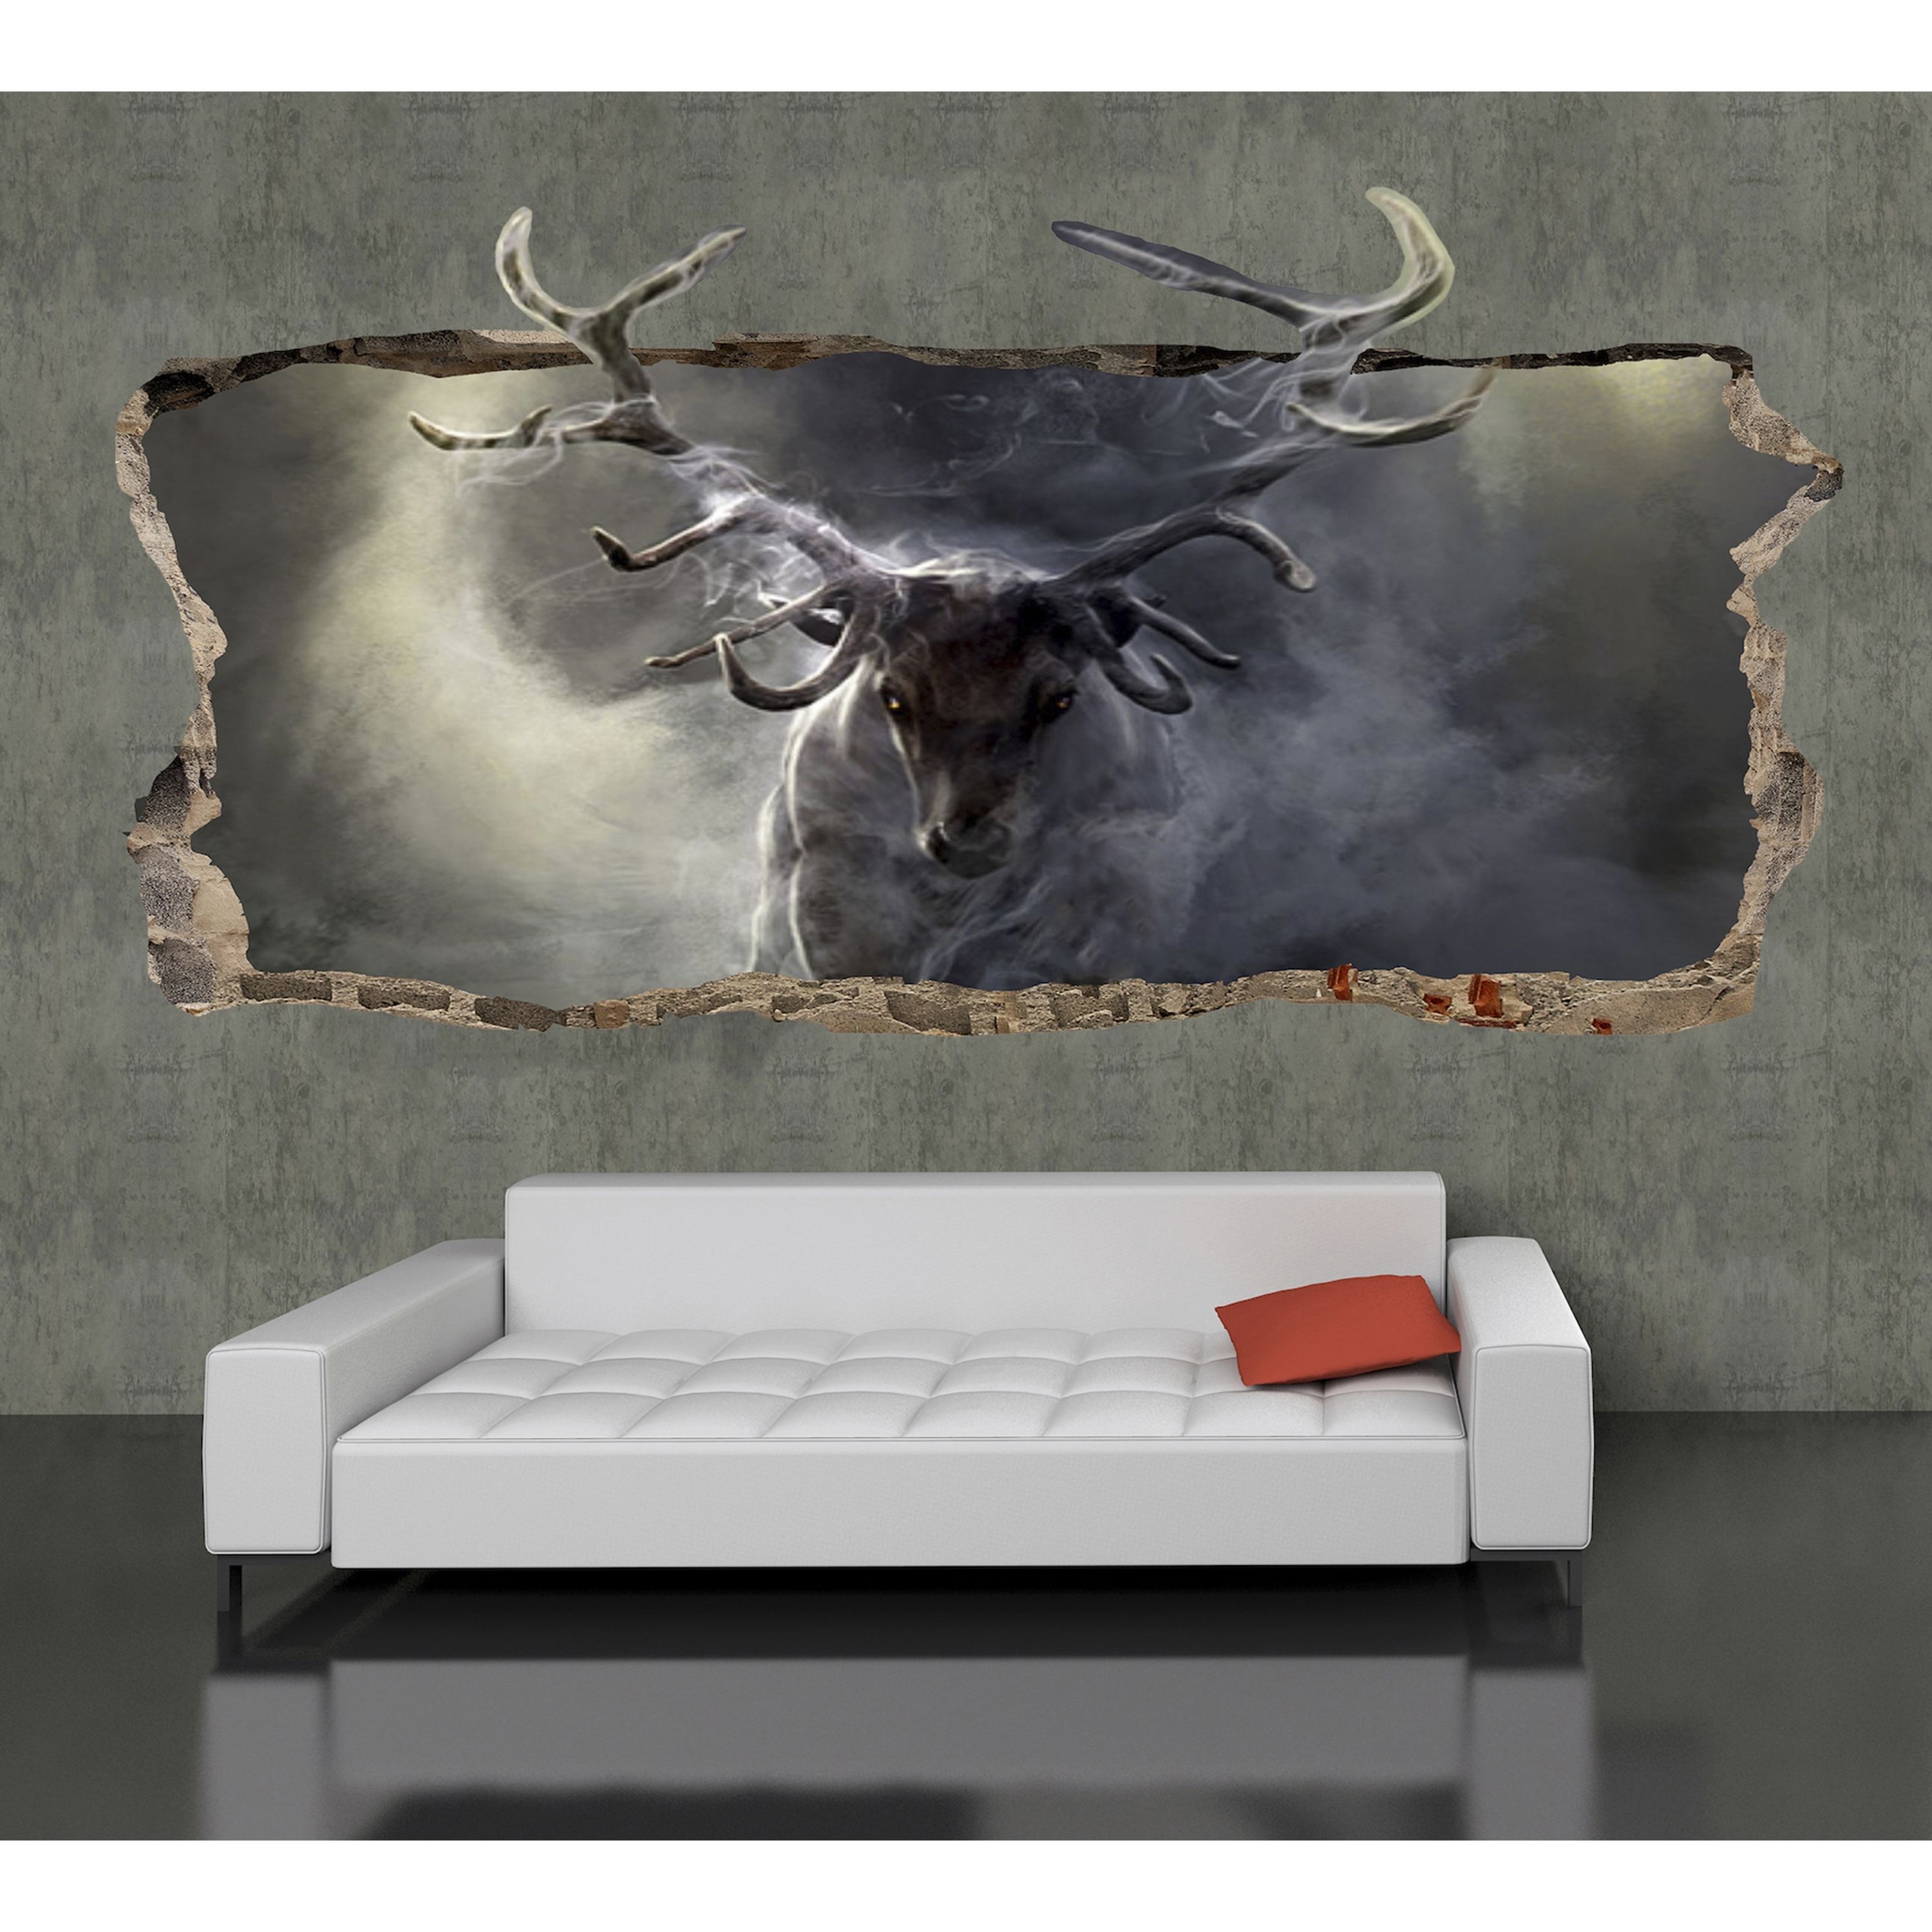 Famous Startonight 3d Mural Wall Art Photo Decor Deer Amazing Dual View With Regard To Animals 3d Wall Art (View 6 of 15)